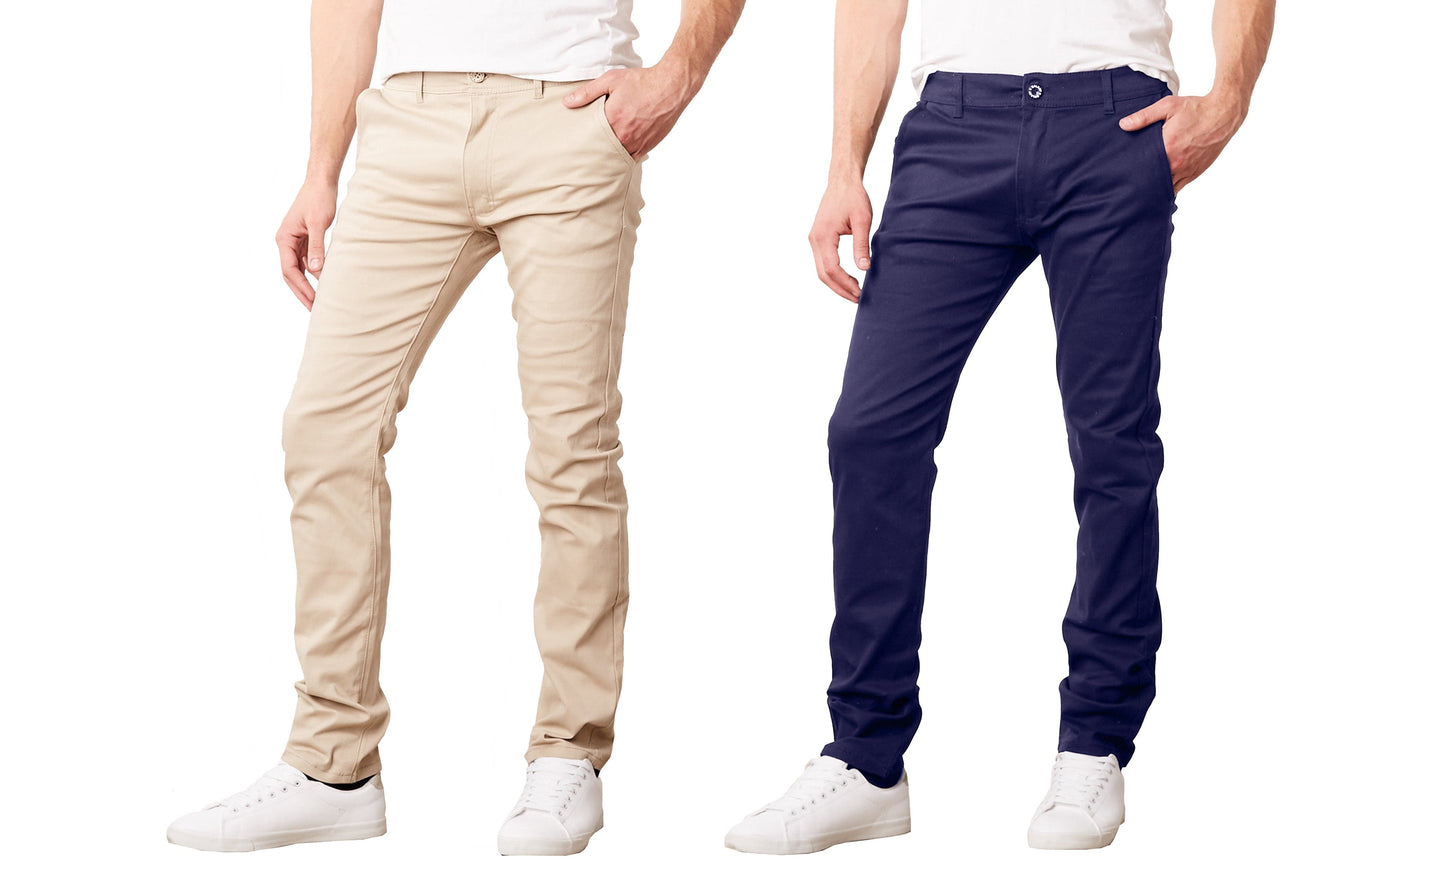 Men's Slim Fit Cotton Stretch Chino Pants 2 Pack - GalaxybyHarvic